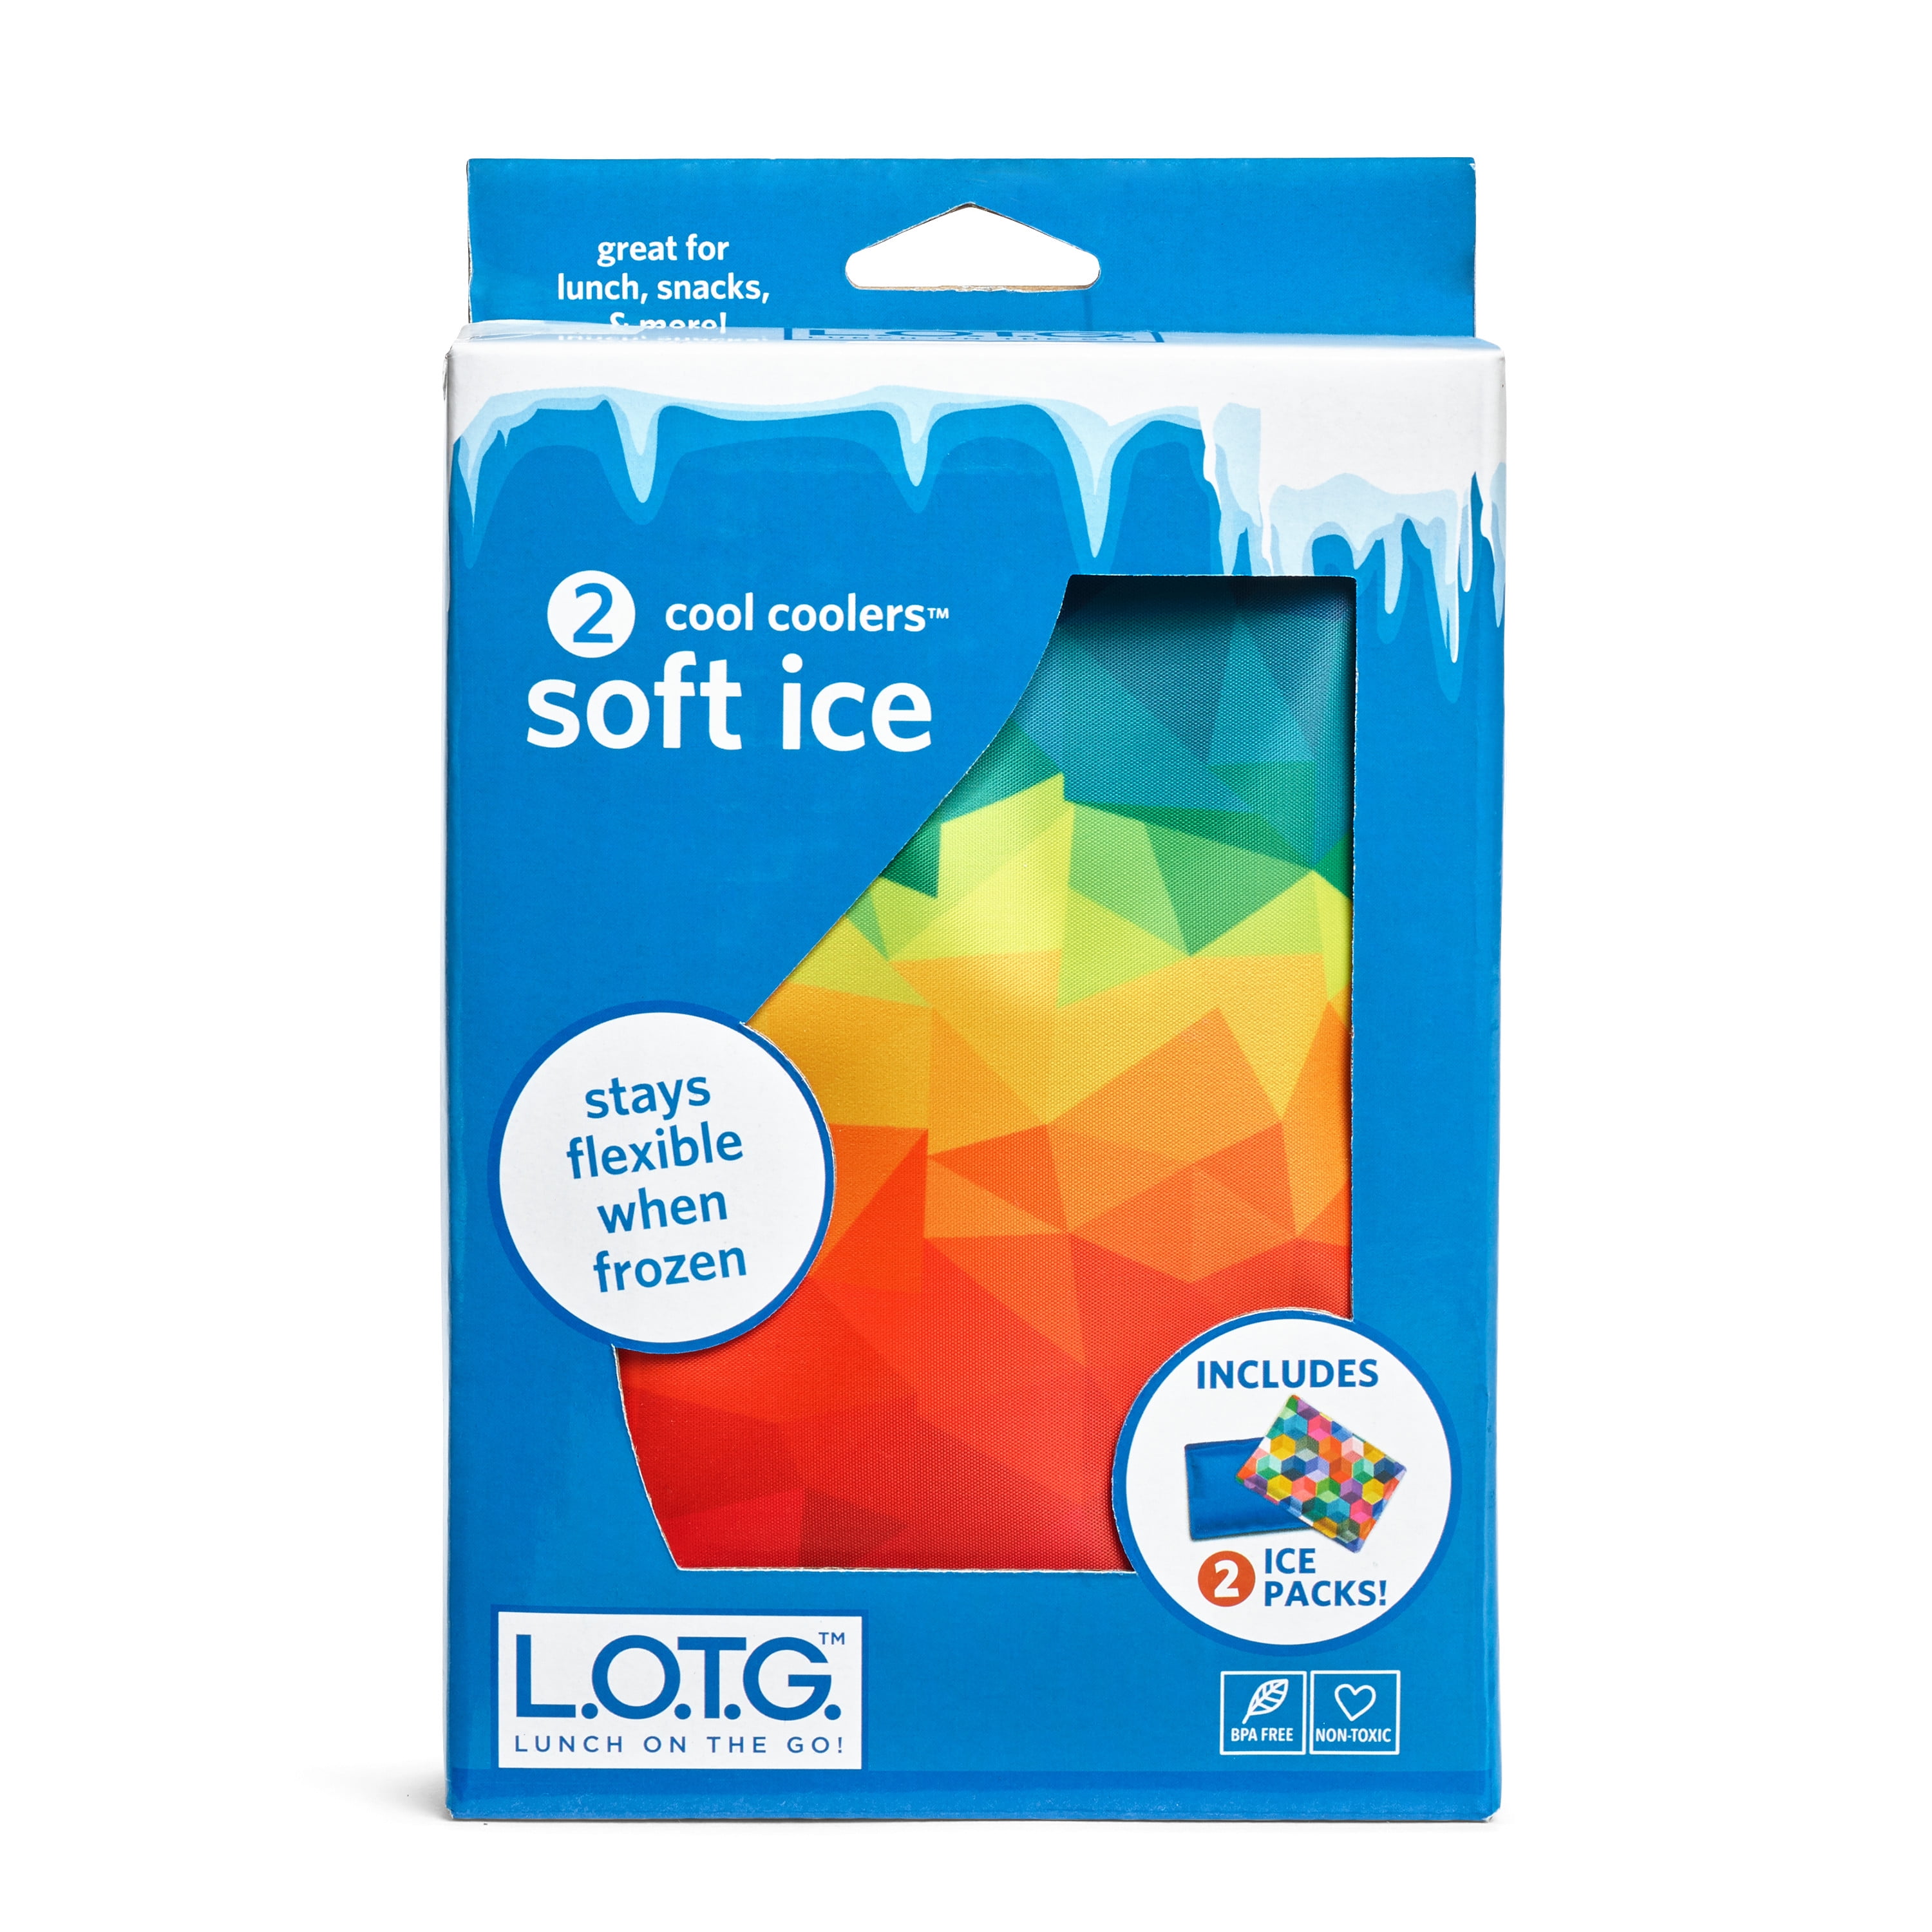 L.O.T.G 2 Cool Coolers Soft Ice Backs Stays Flexible When Frozen 